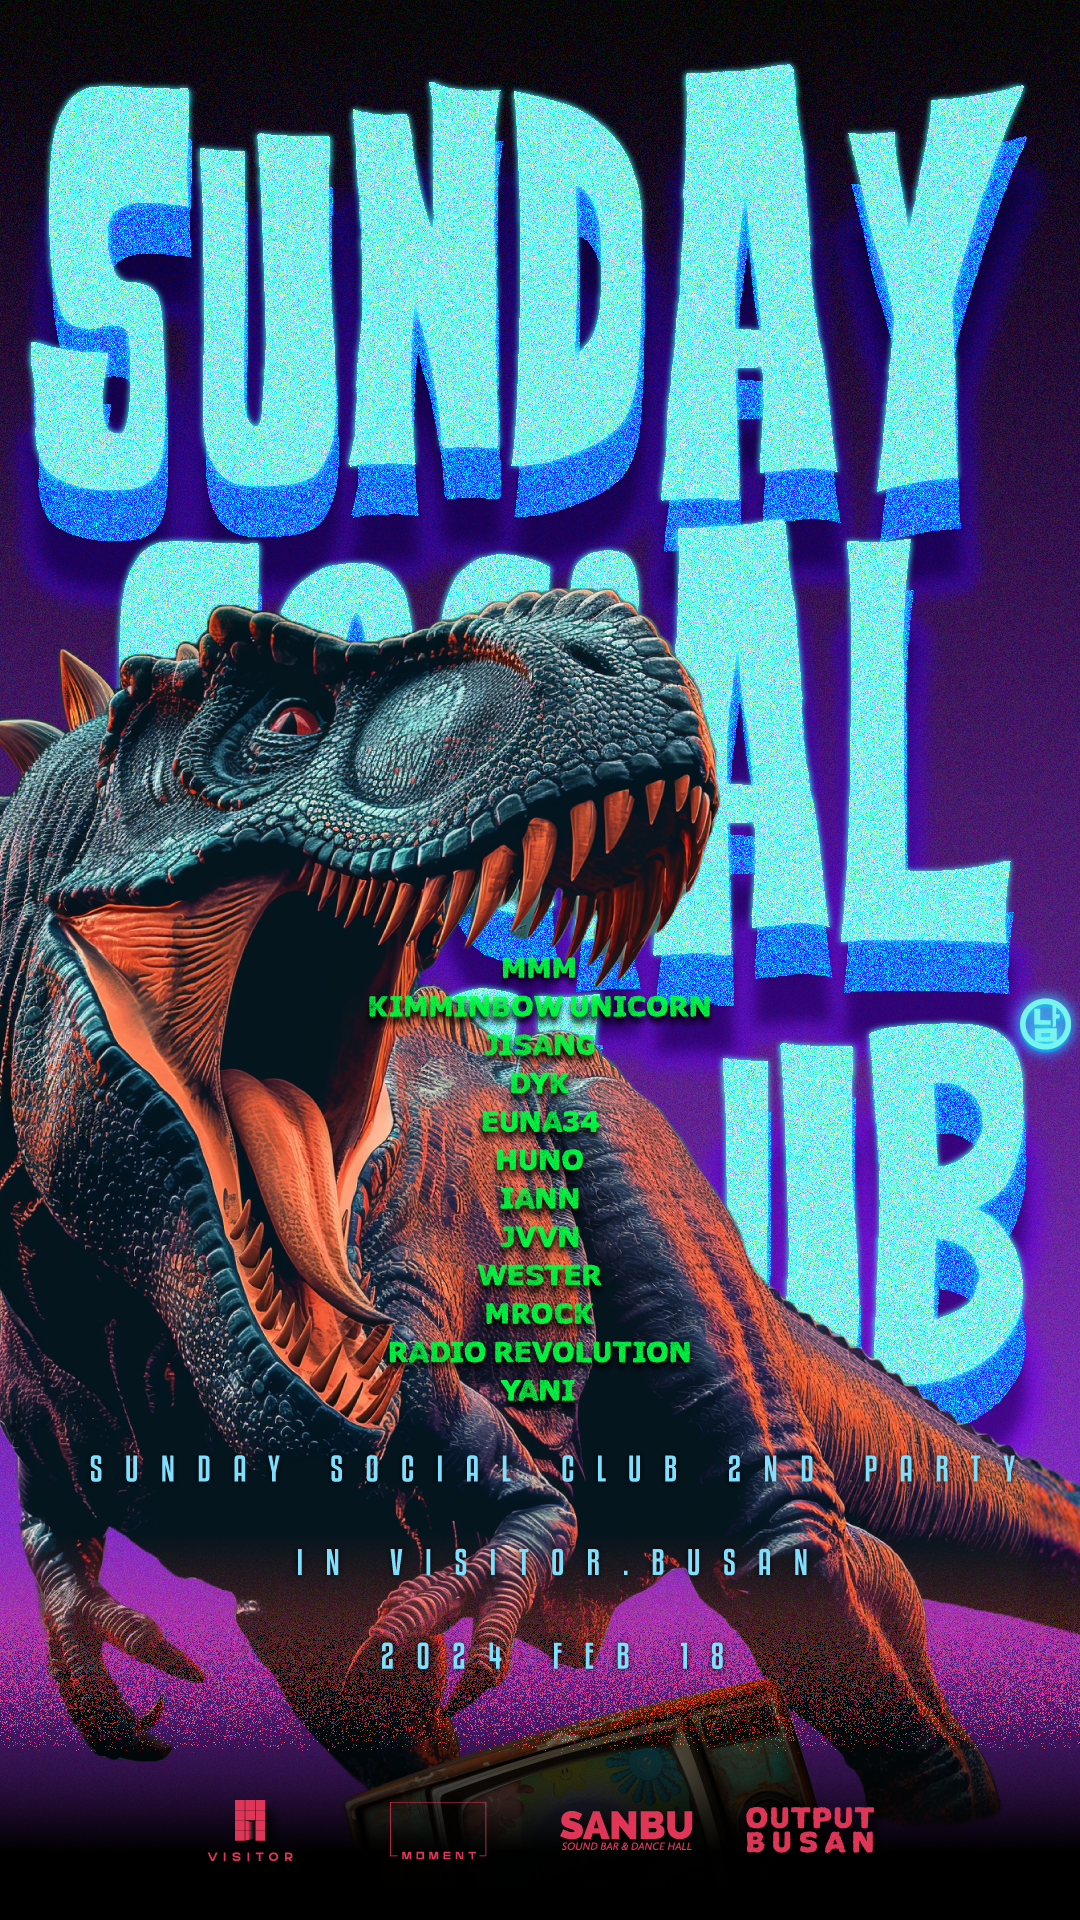 Sunday Social Club 2nd. Event - フライヤー表